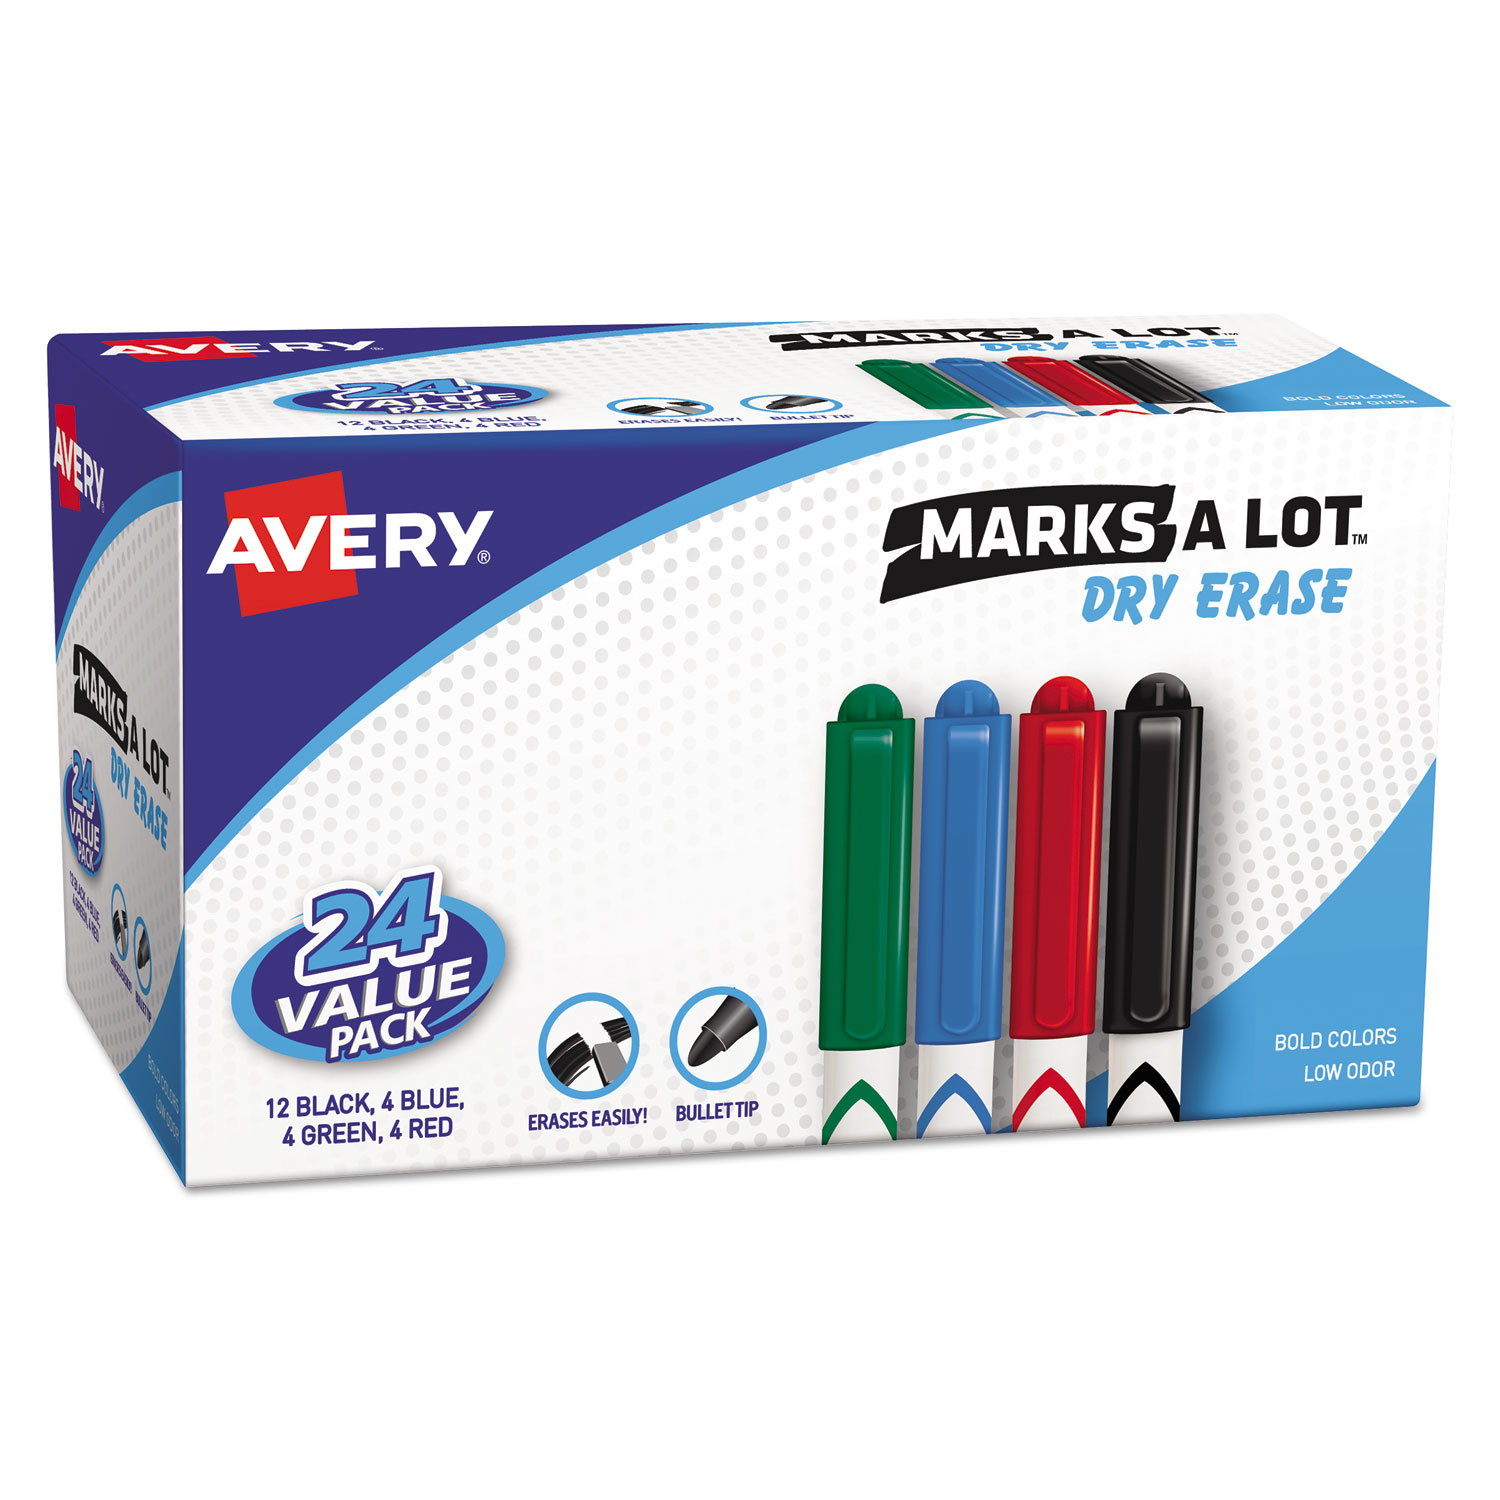 Colorations Dry Erase Markers, Bullet Tip - Set of 48